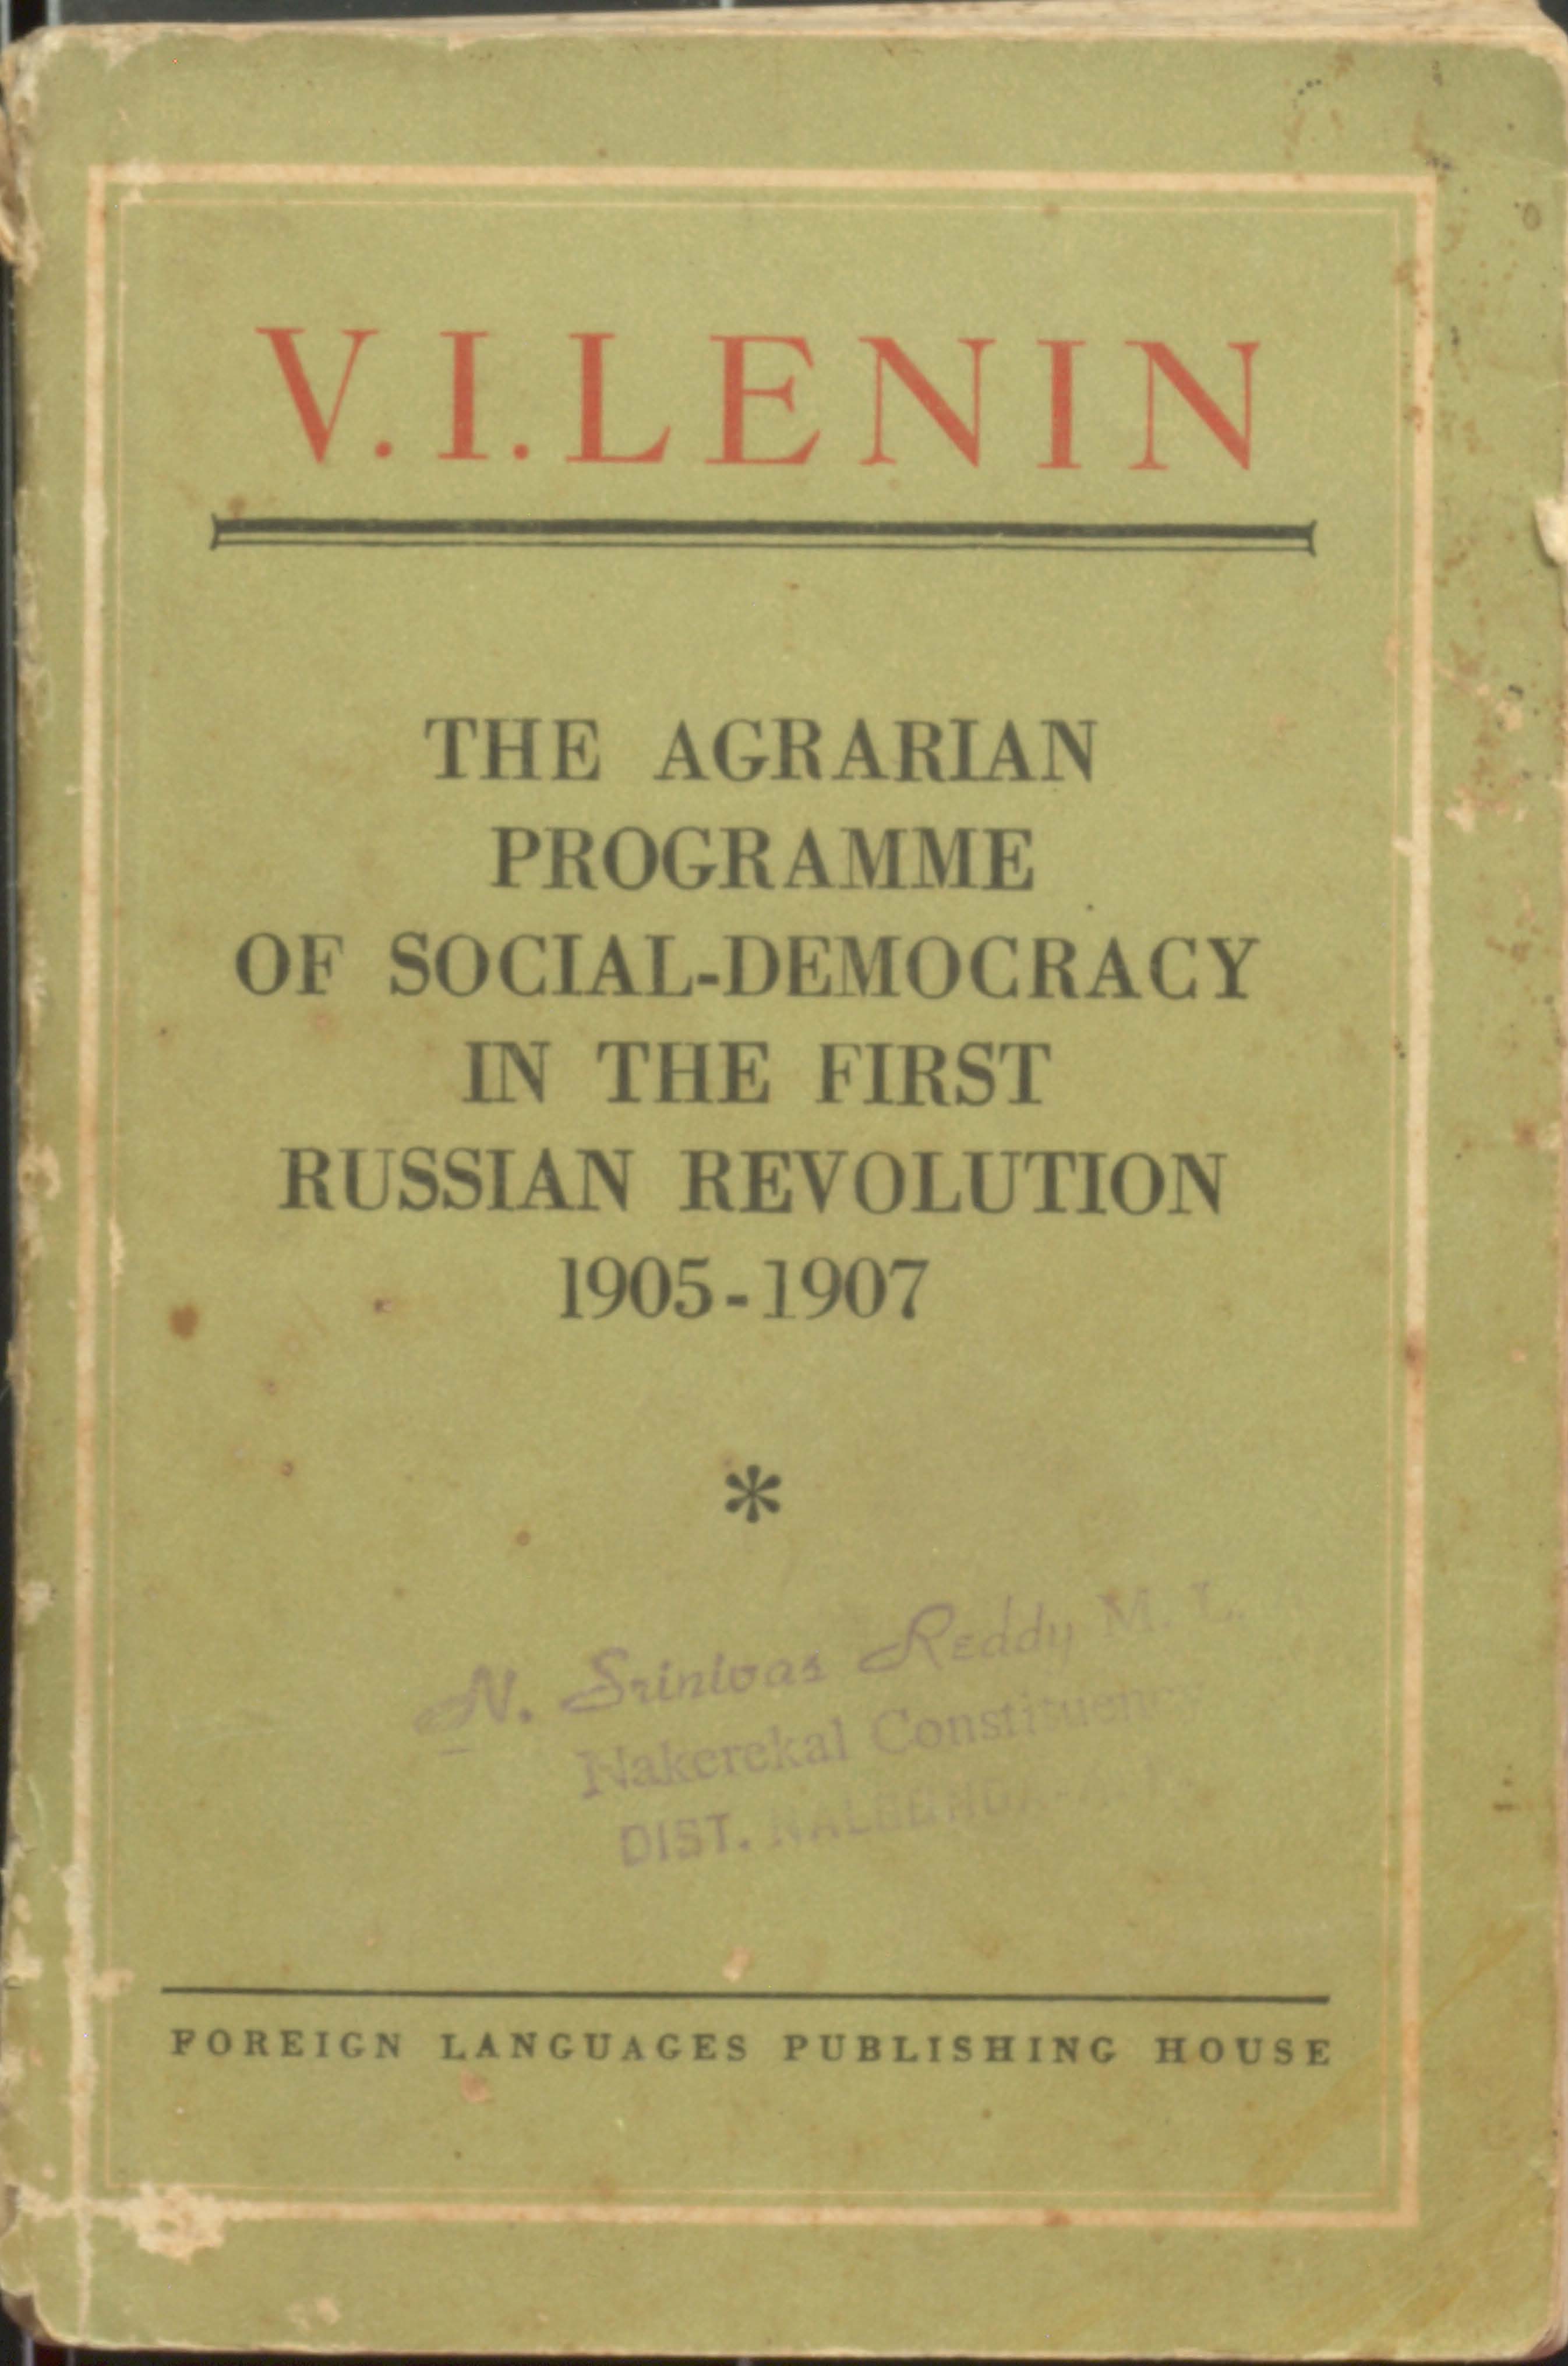 V.I.Lenin the agrarian programme of social-democroacy in the first russlan revolution,1905-1907